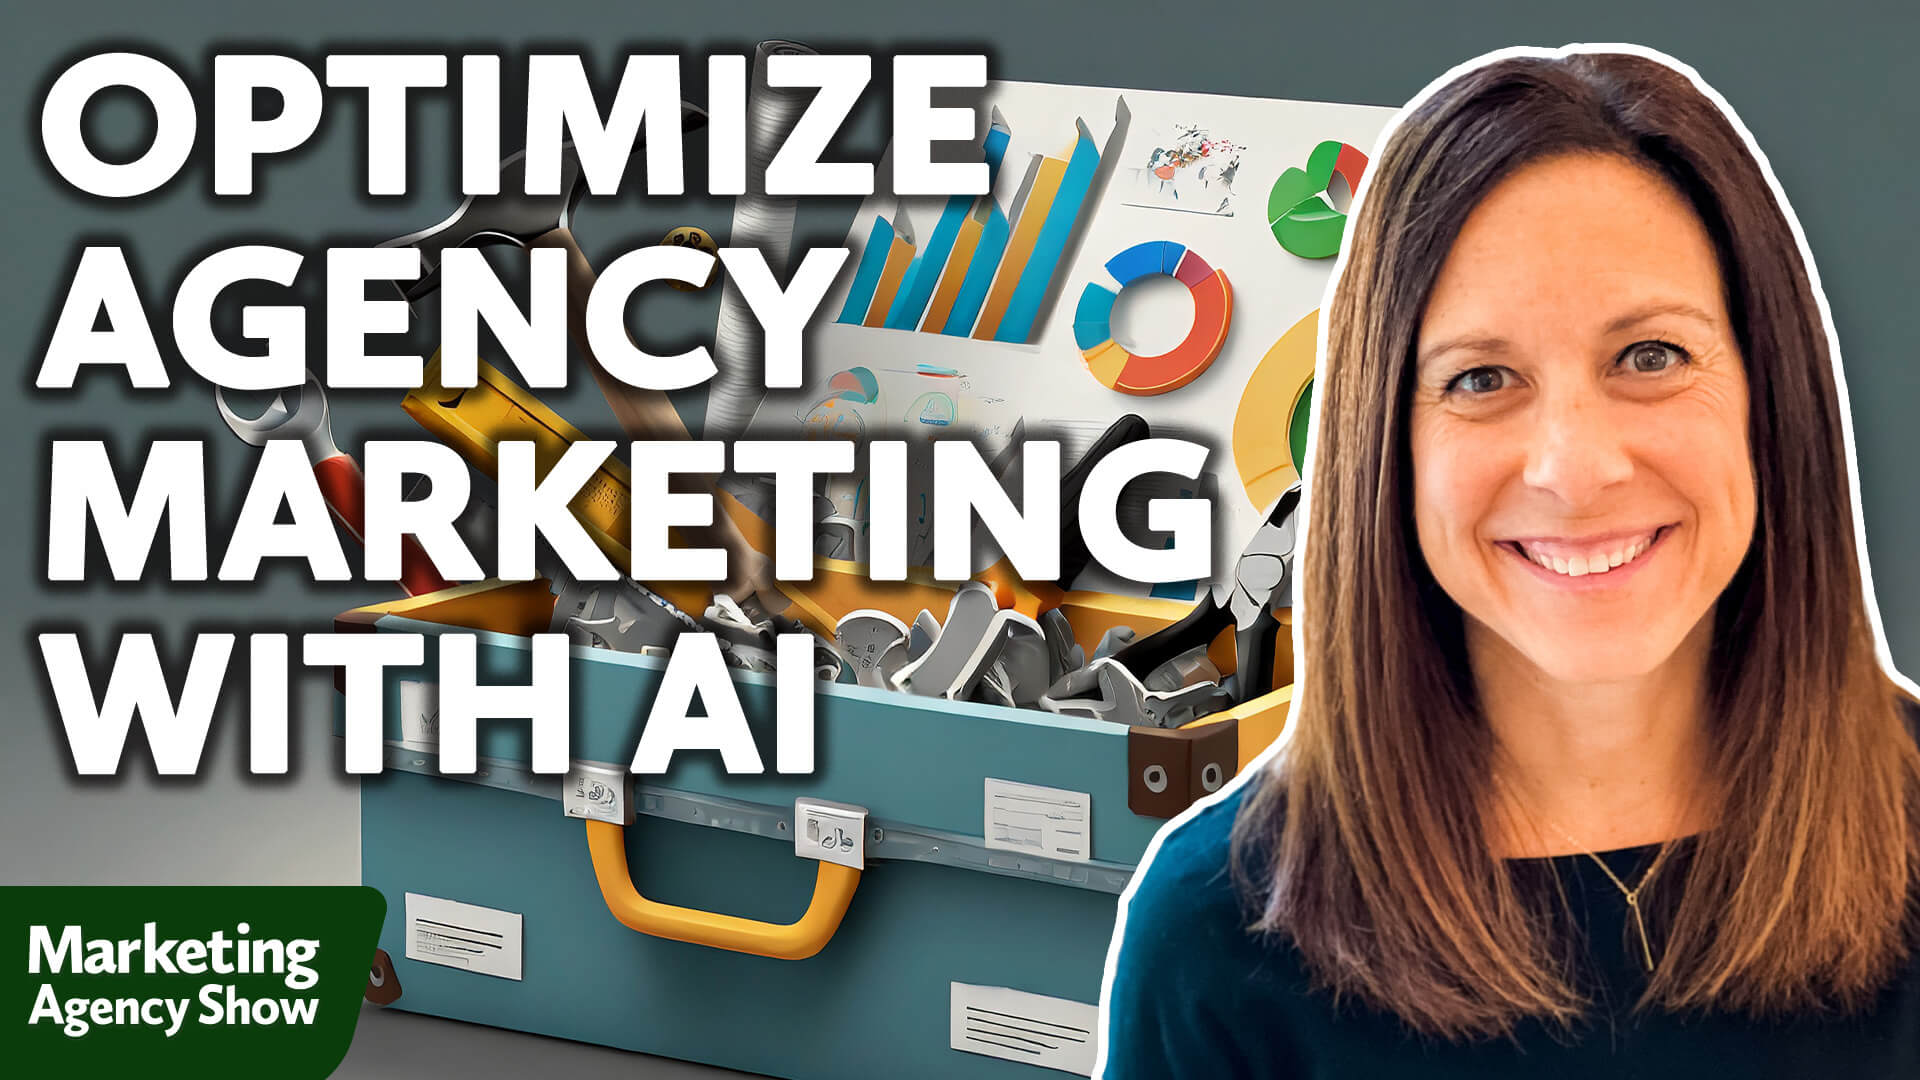 How to Optimize Agency Marketing With AI by Social Media Examiner